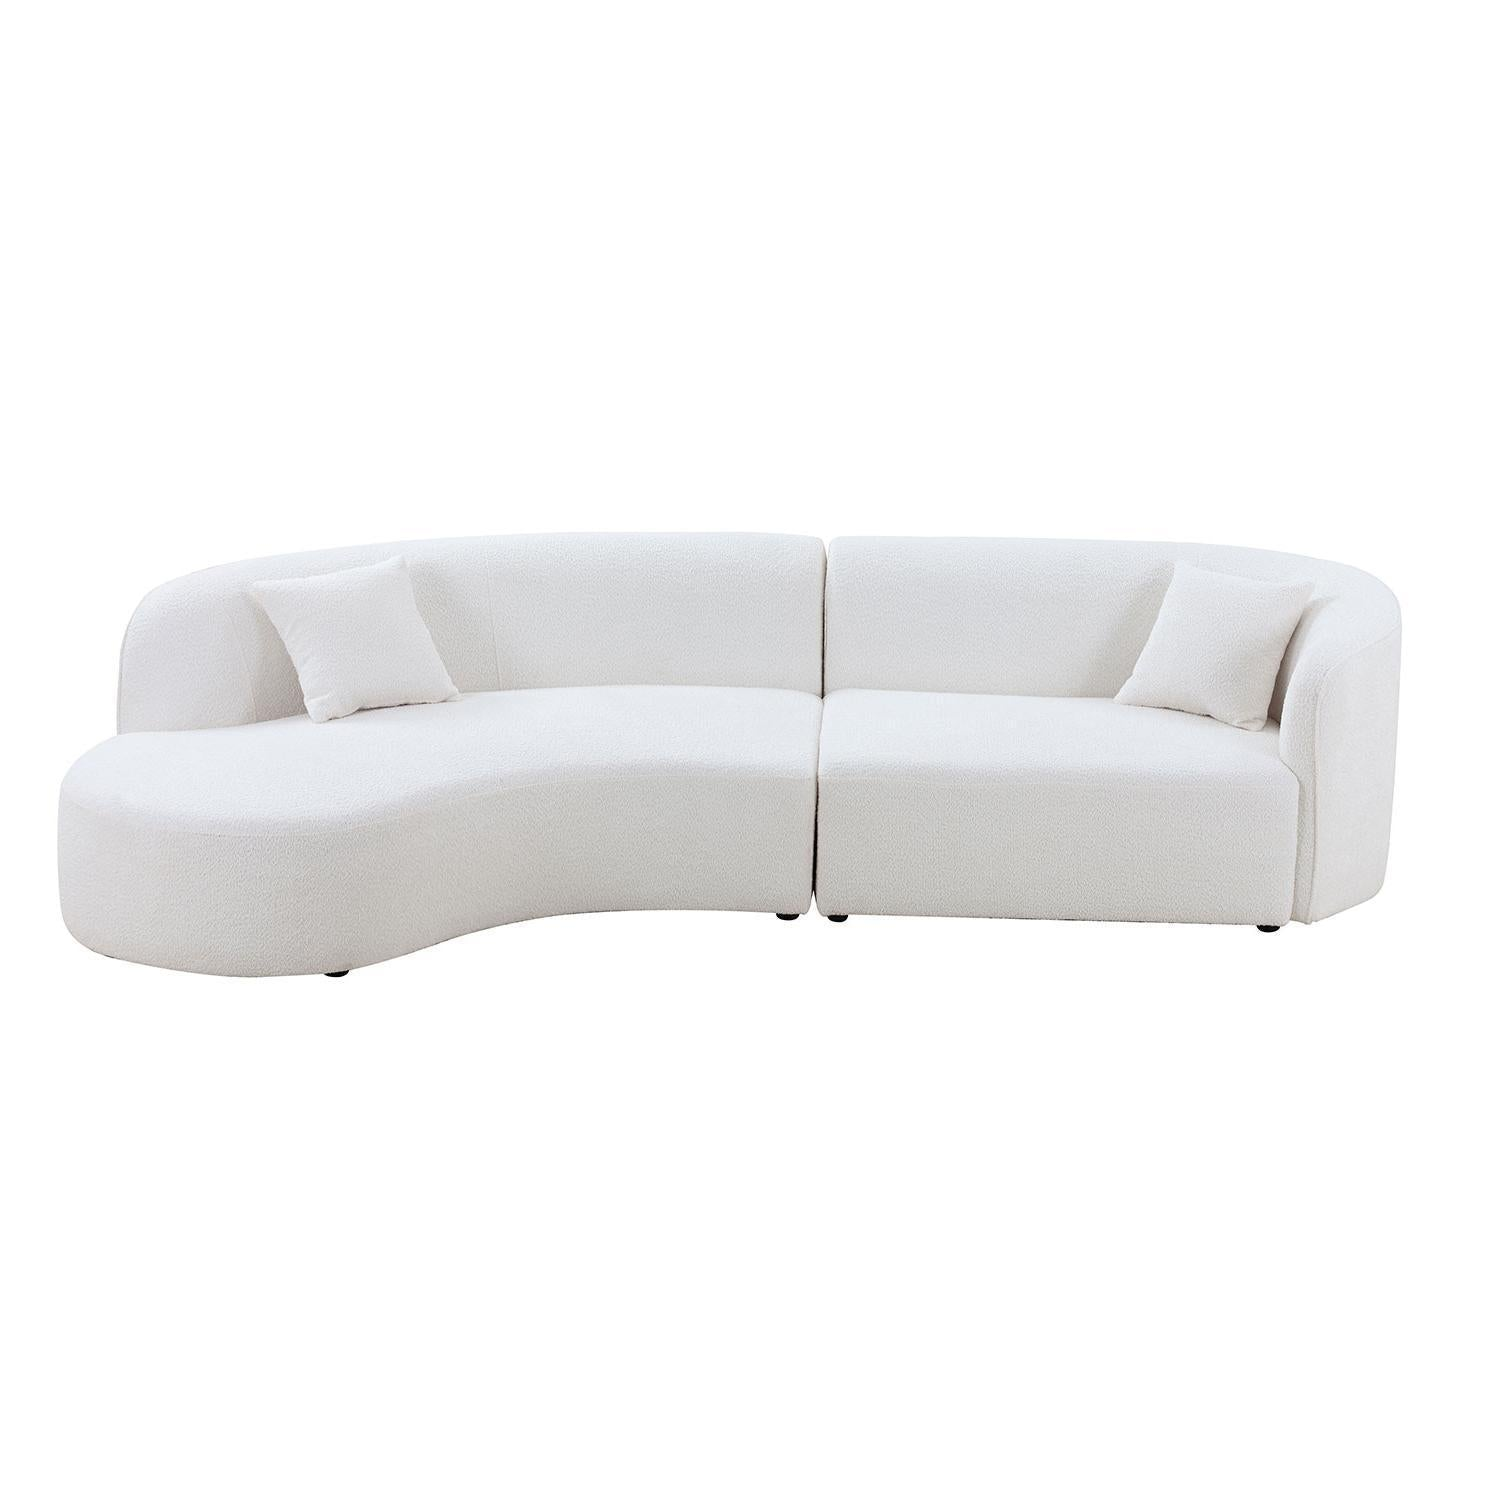 Luxury Modern Style Living Room Upholstery Curved Sofa with Chaise 2-Piece Set, Left Hand Facing Sectional,  Boucle Couch, White, Goodies N Stuff